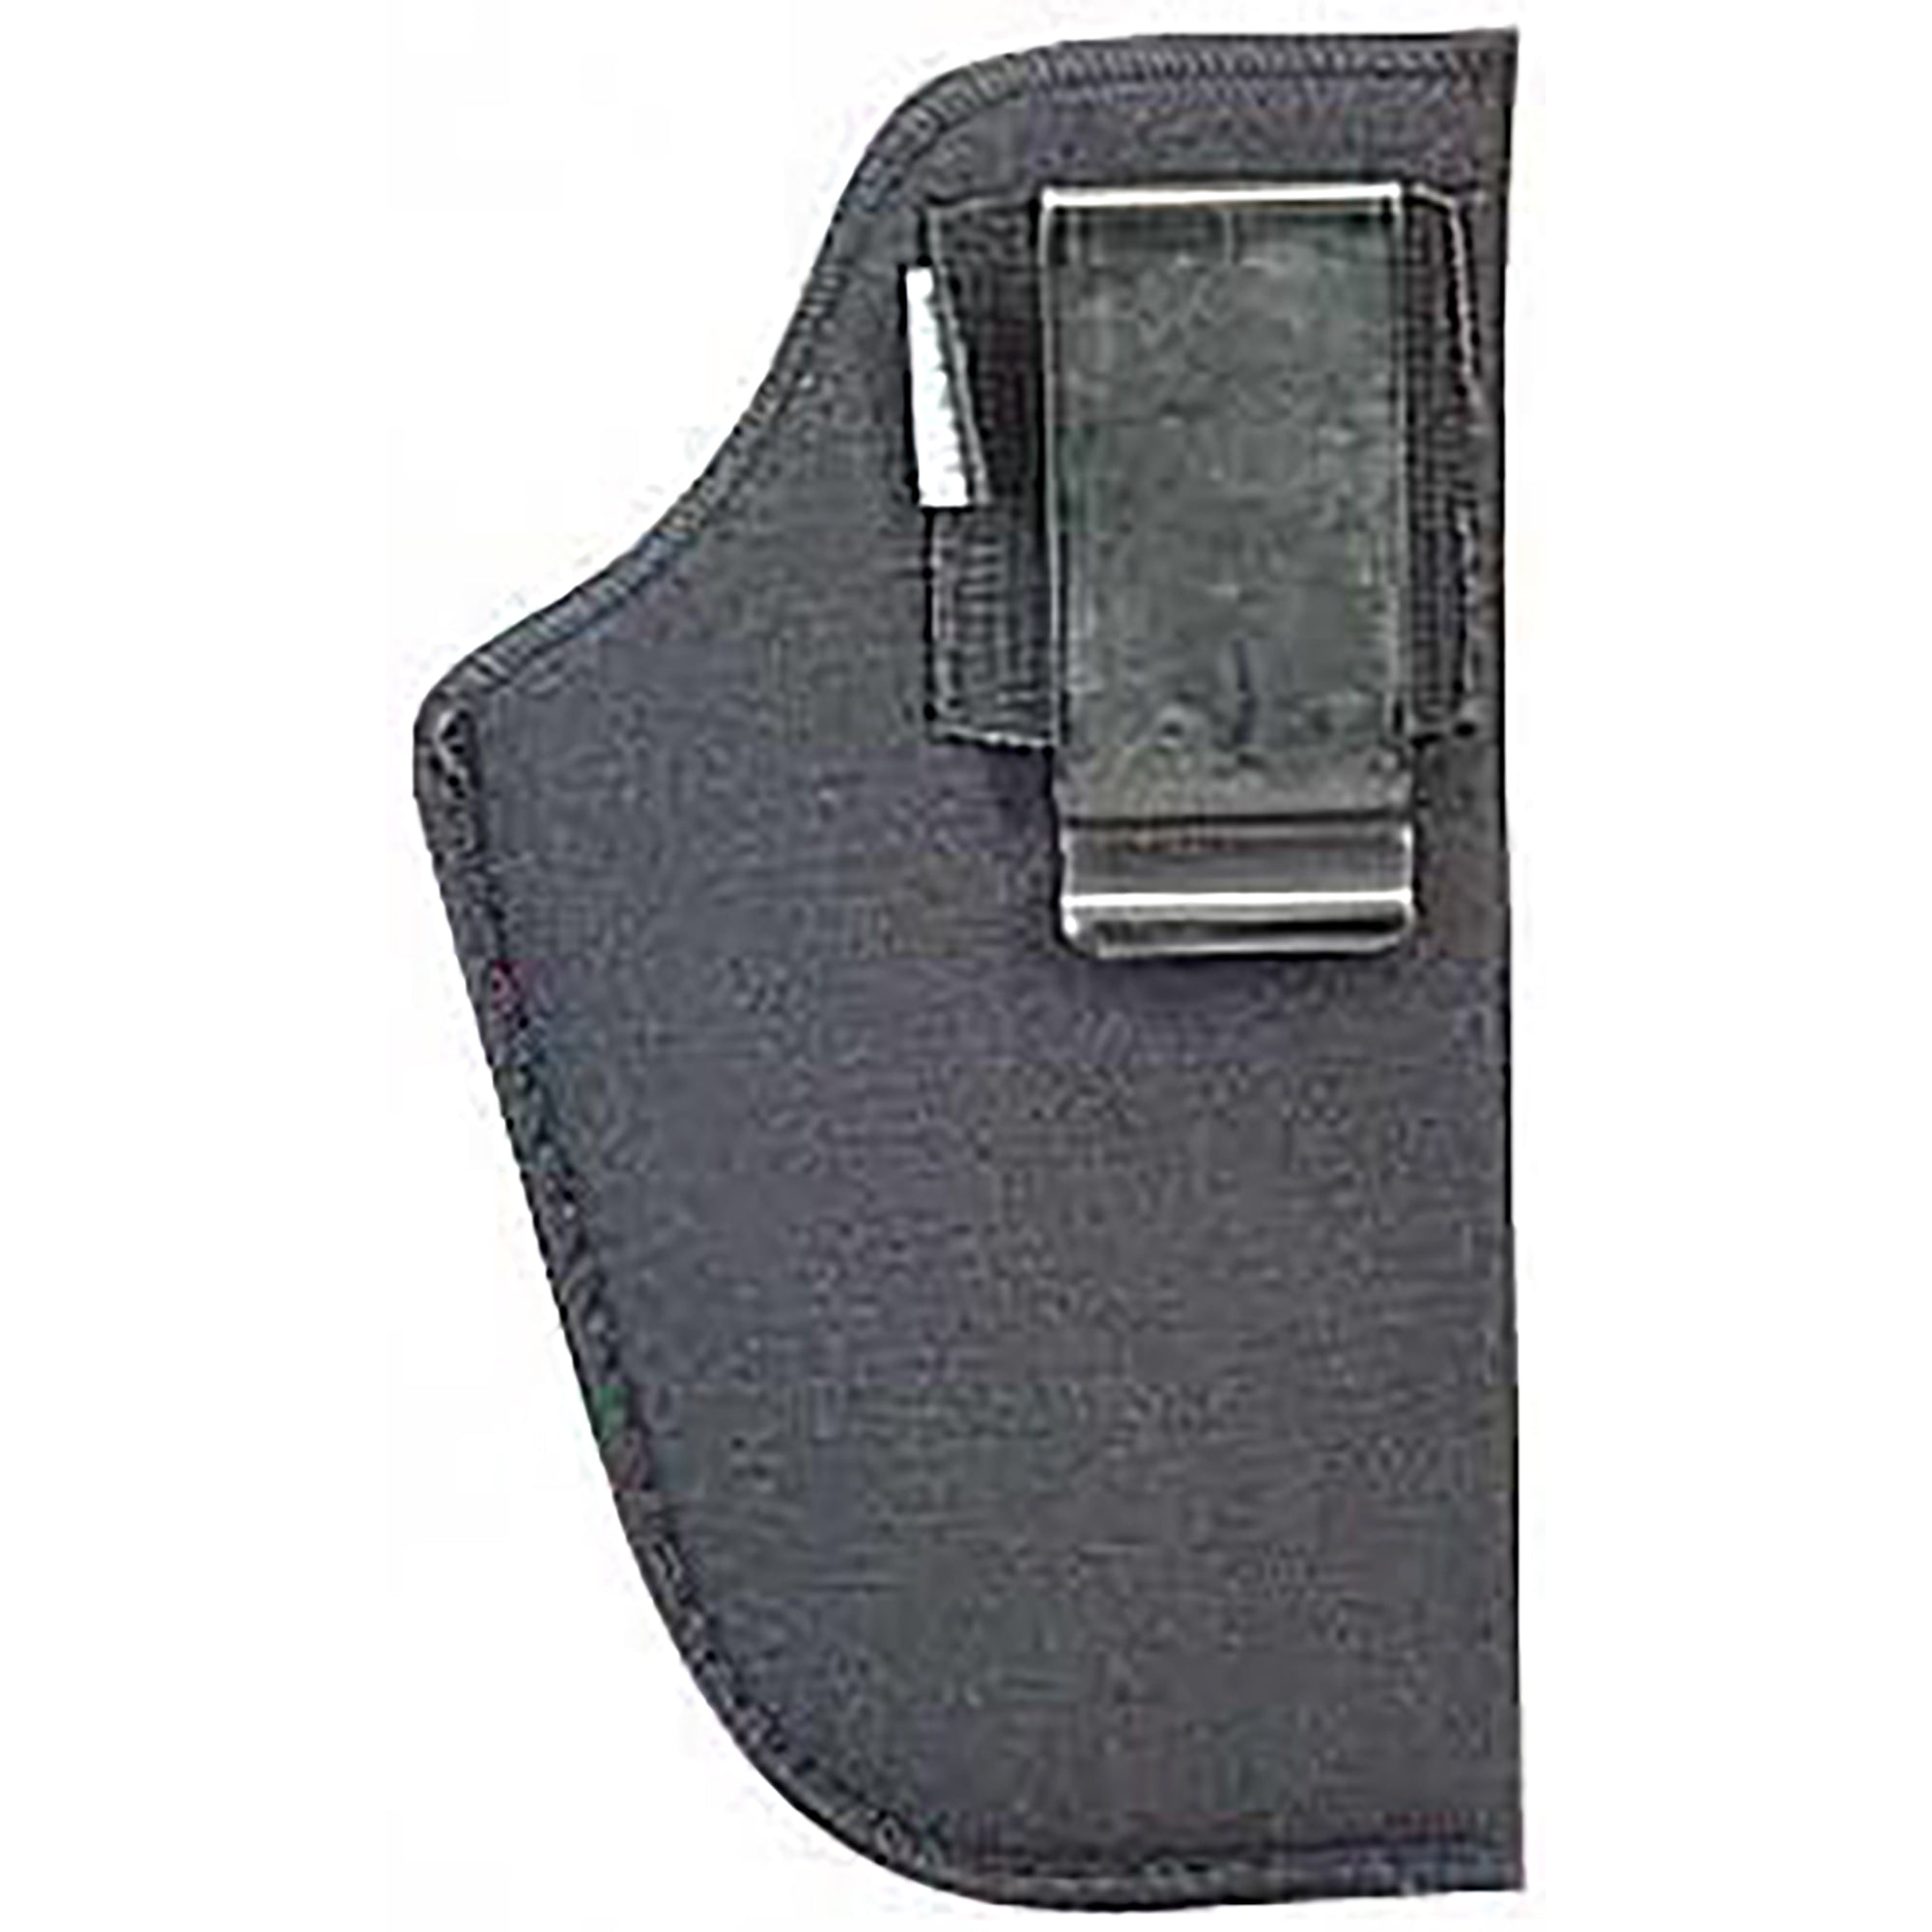 GunMate Inside-The-Pants Right-Handed Hip Holster - Size 12 - Black GunMate